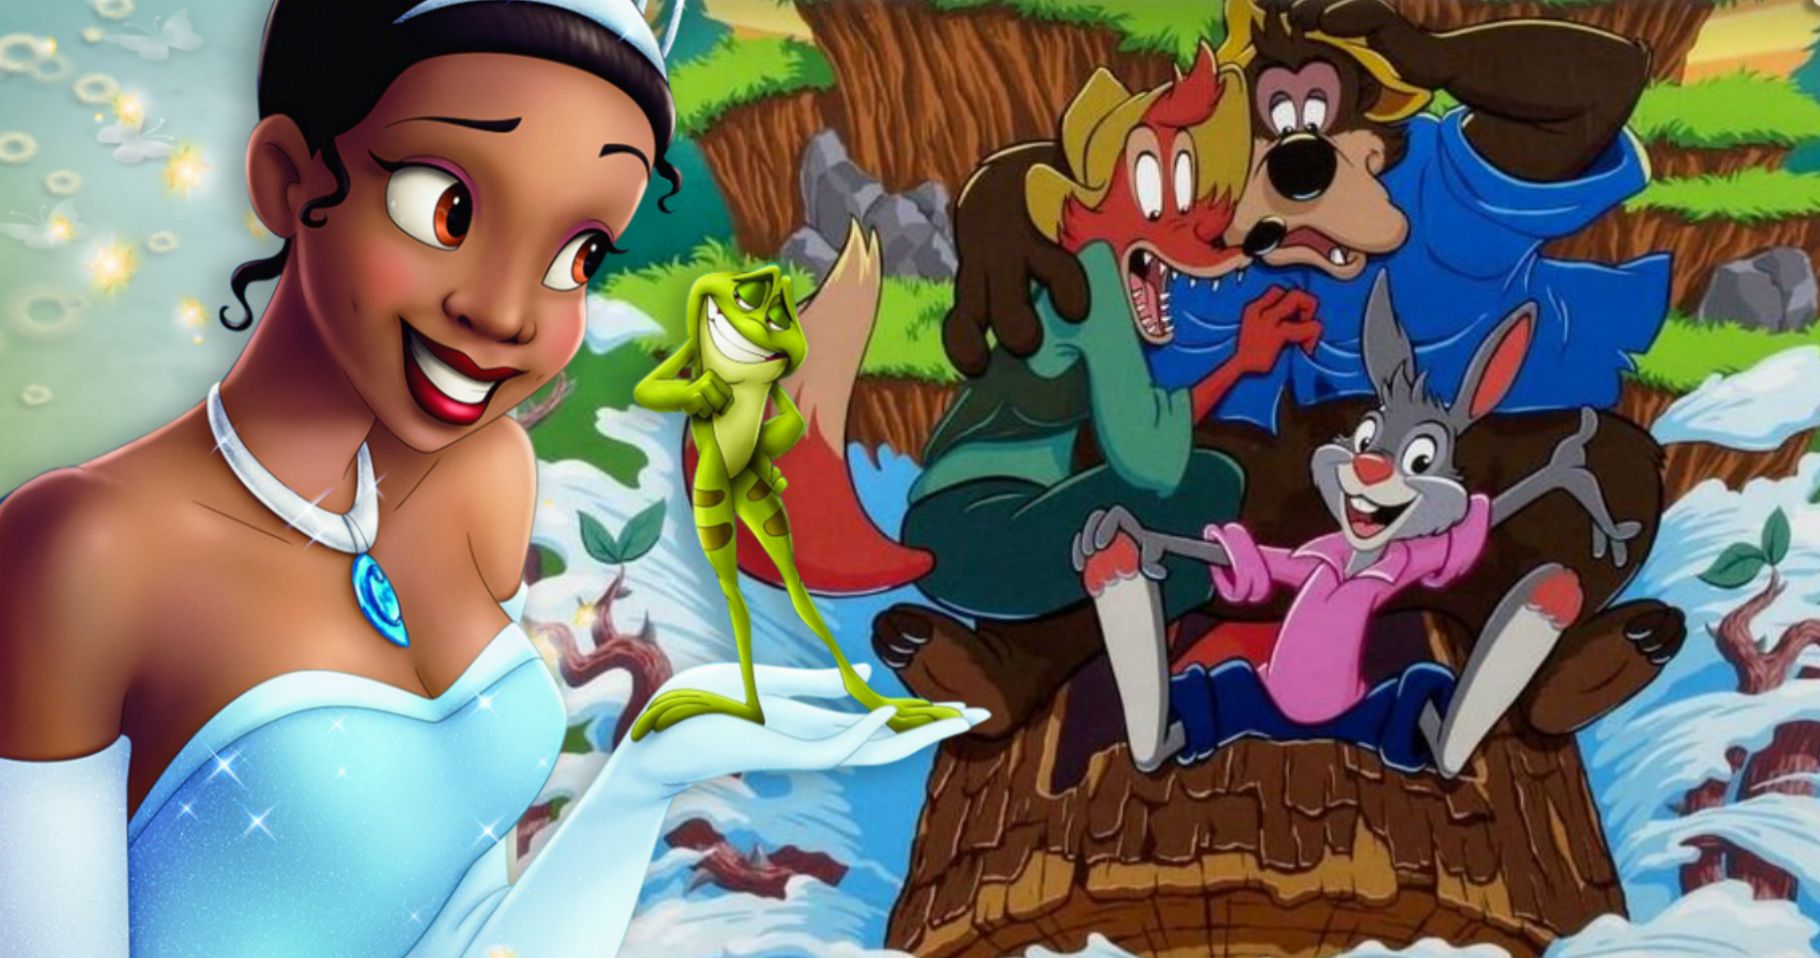 Disney Remaking 'The Princess and the Frog' - Inside the Magic